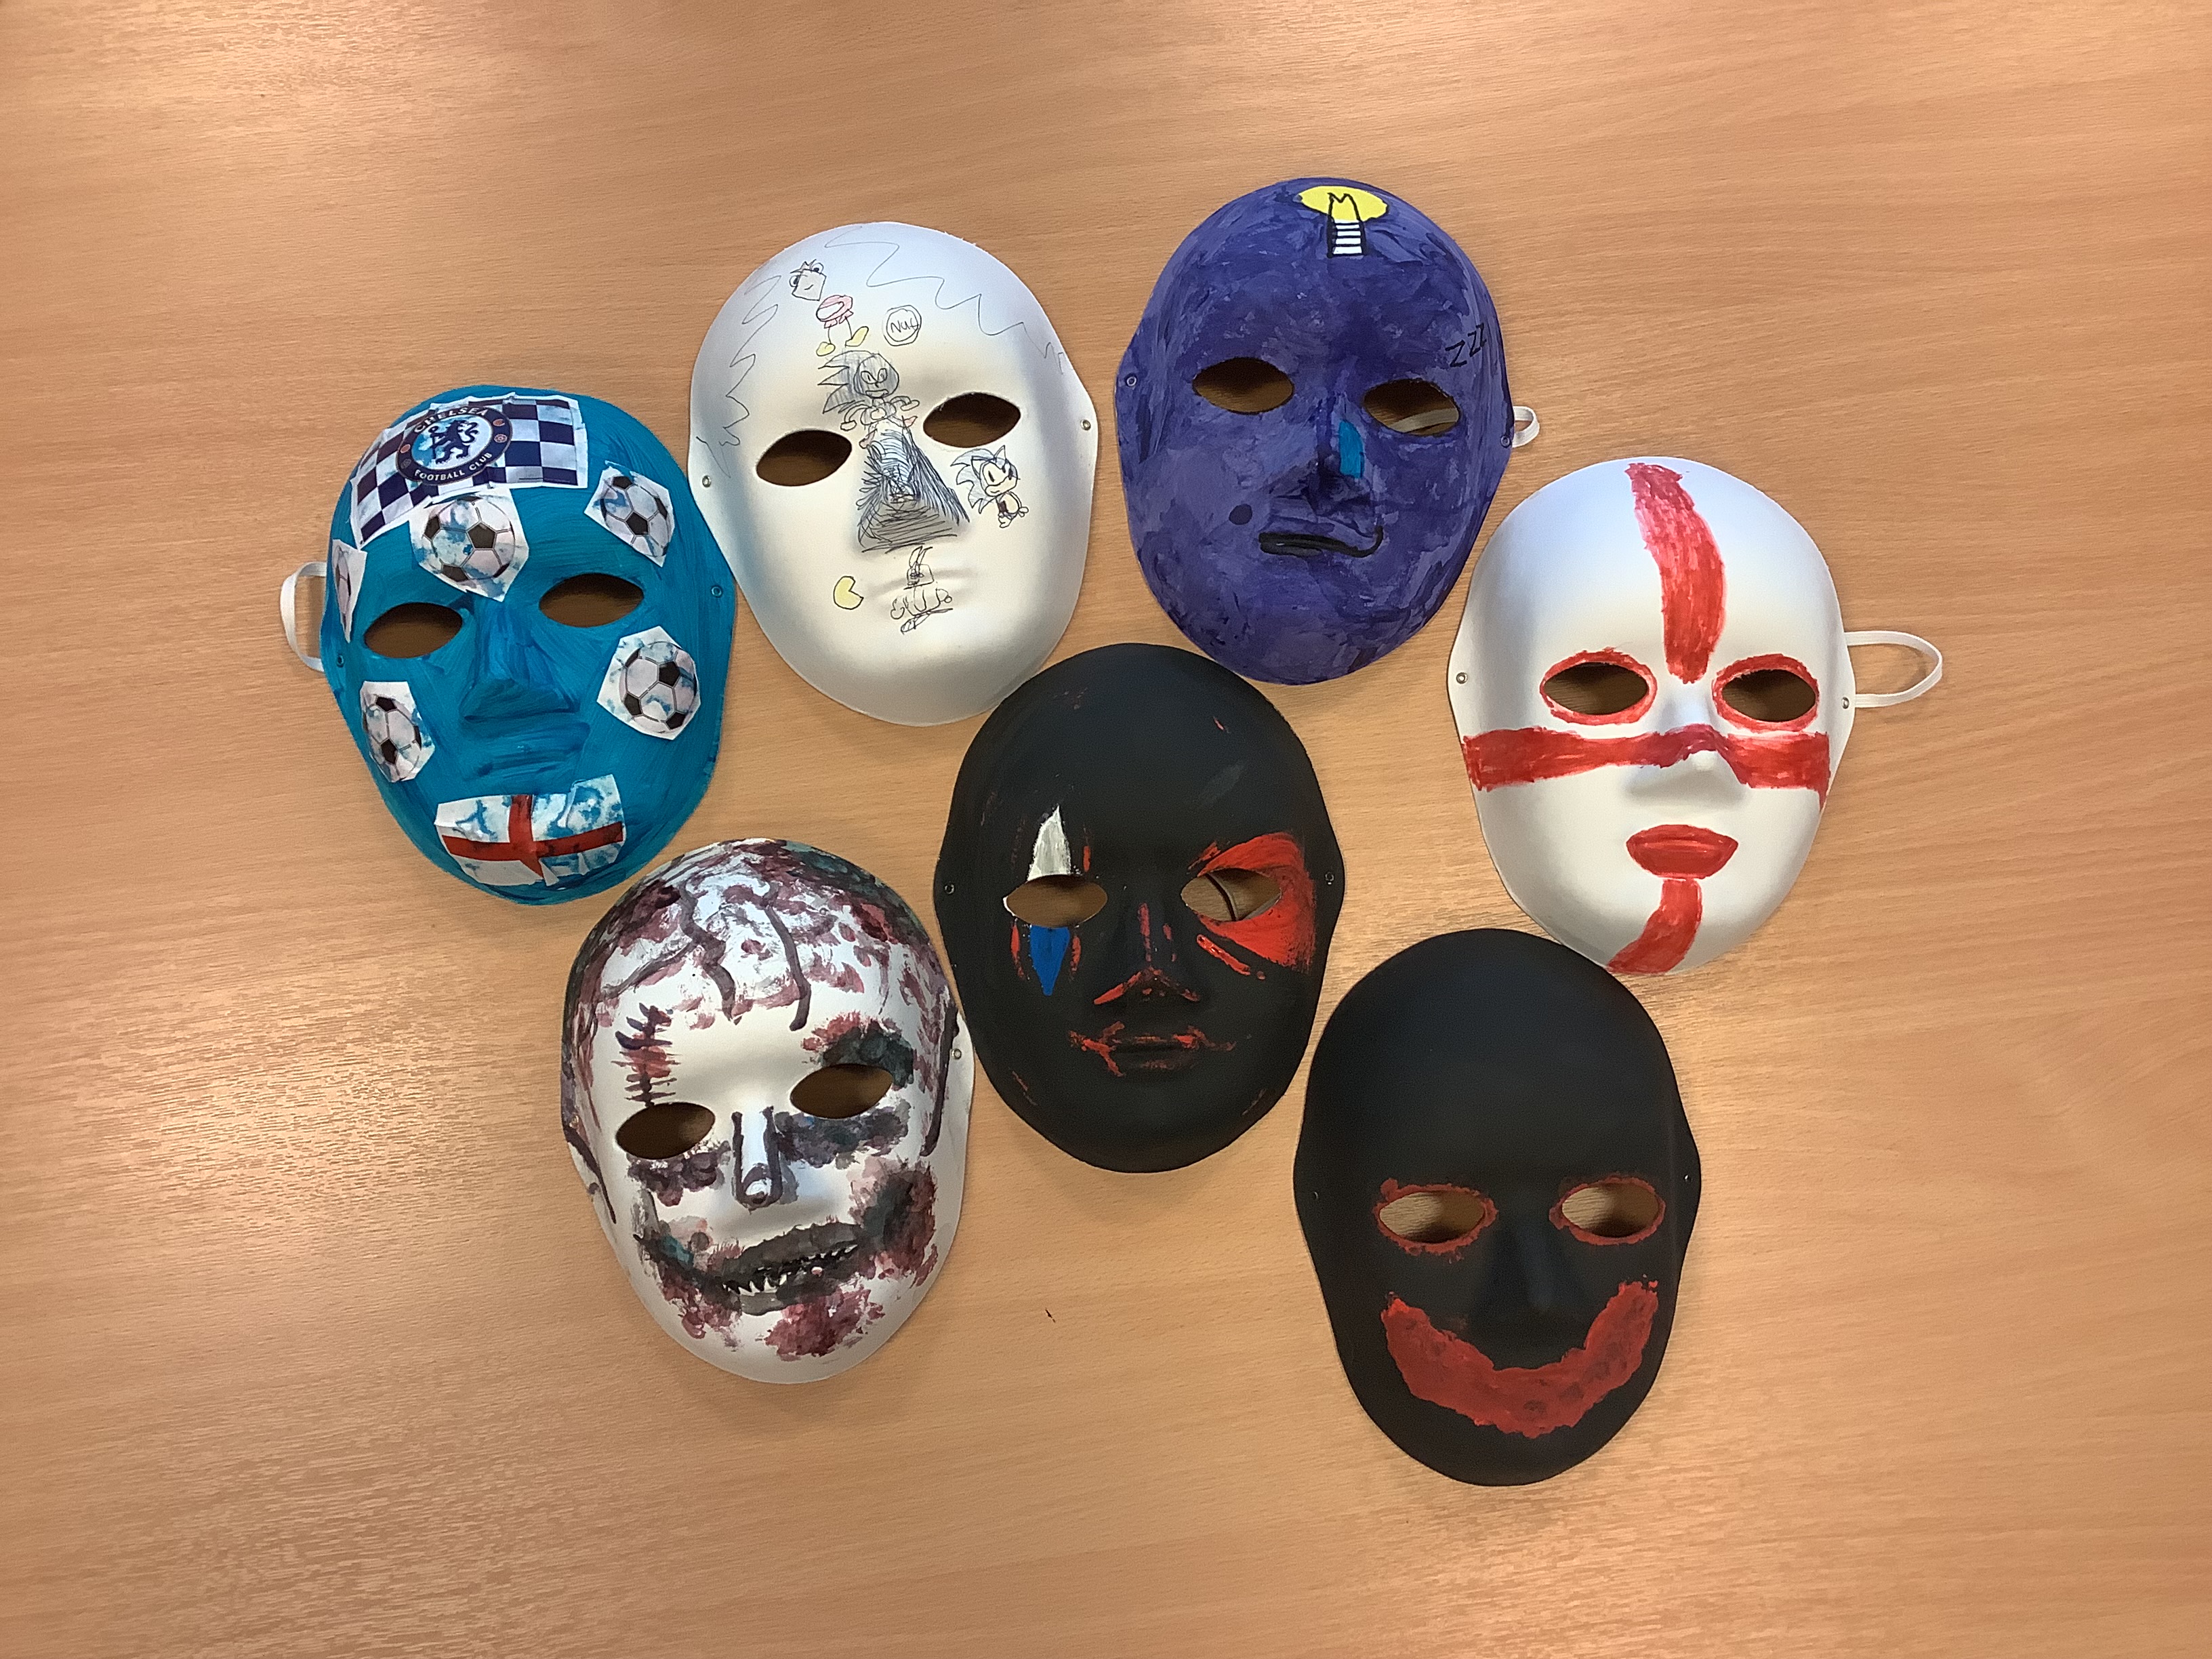 St Johns 4 the Deaf on Twitter: have been reading a poem named 'We wear the mask' by Paul Laurence Dunbar. They discussed how sometimes we a mask to hide